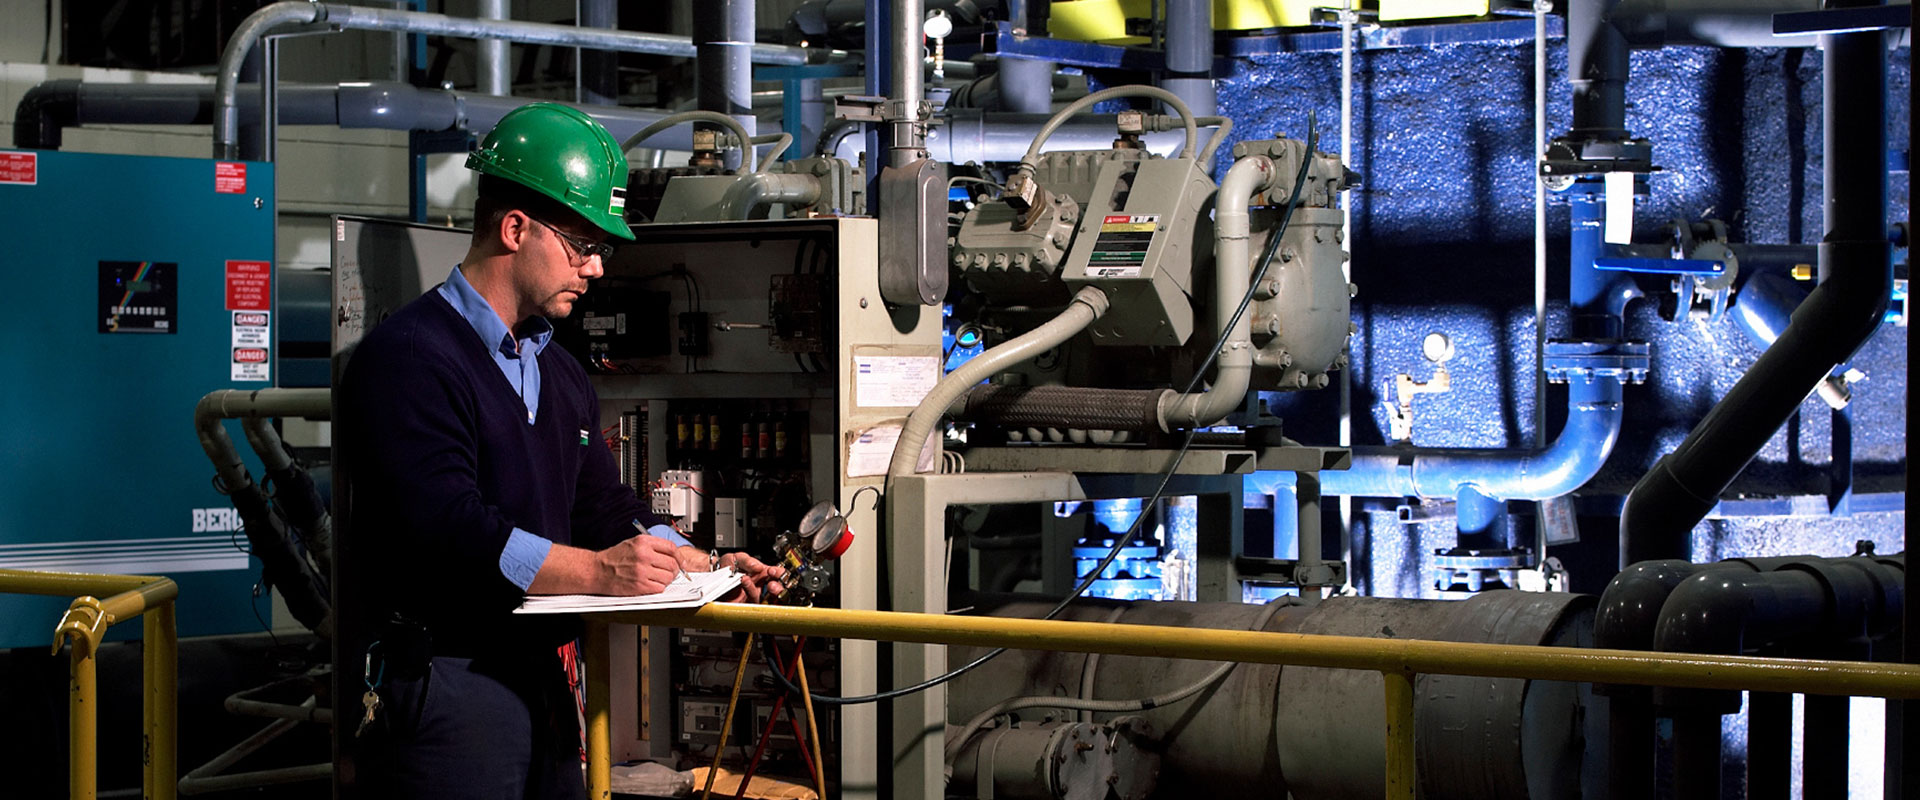 B&M service technician conducting inspections at an industrial facility's refrigeration and production cooling system.